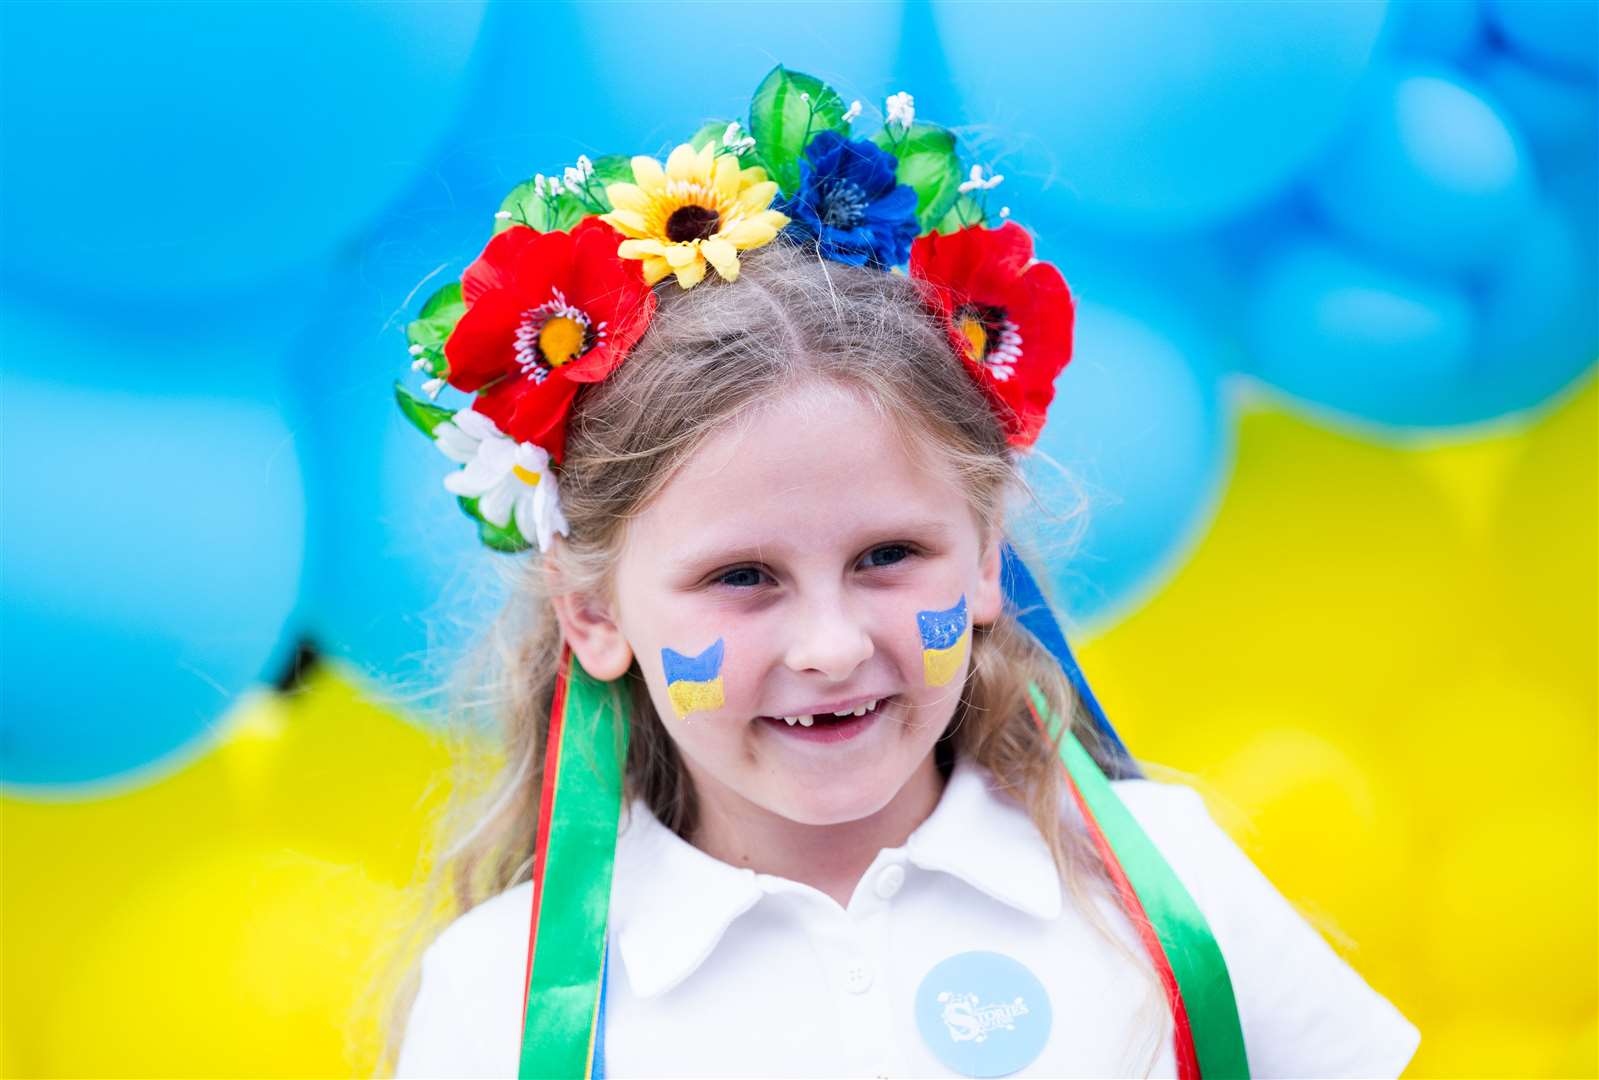 Dressed up for Ukraine Independence Day. Picture: Ian Burt